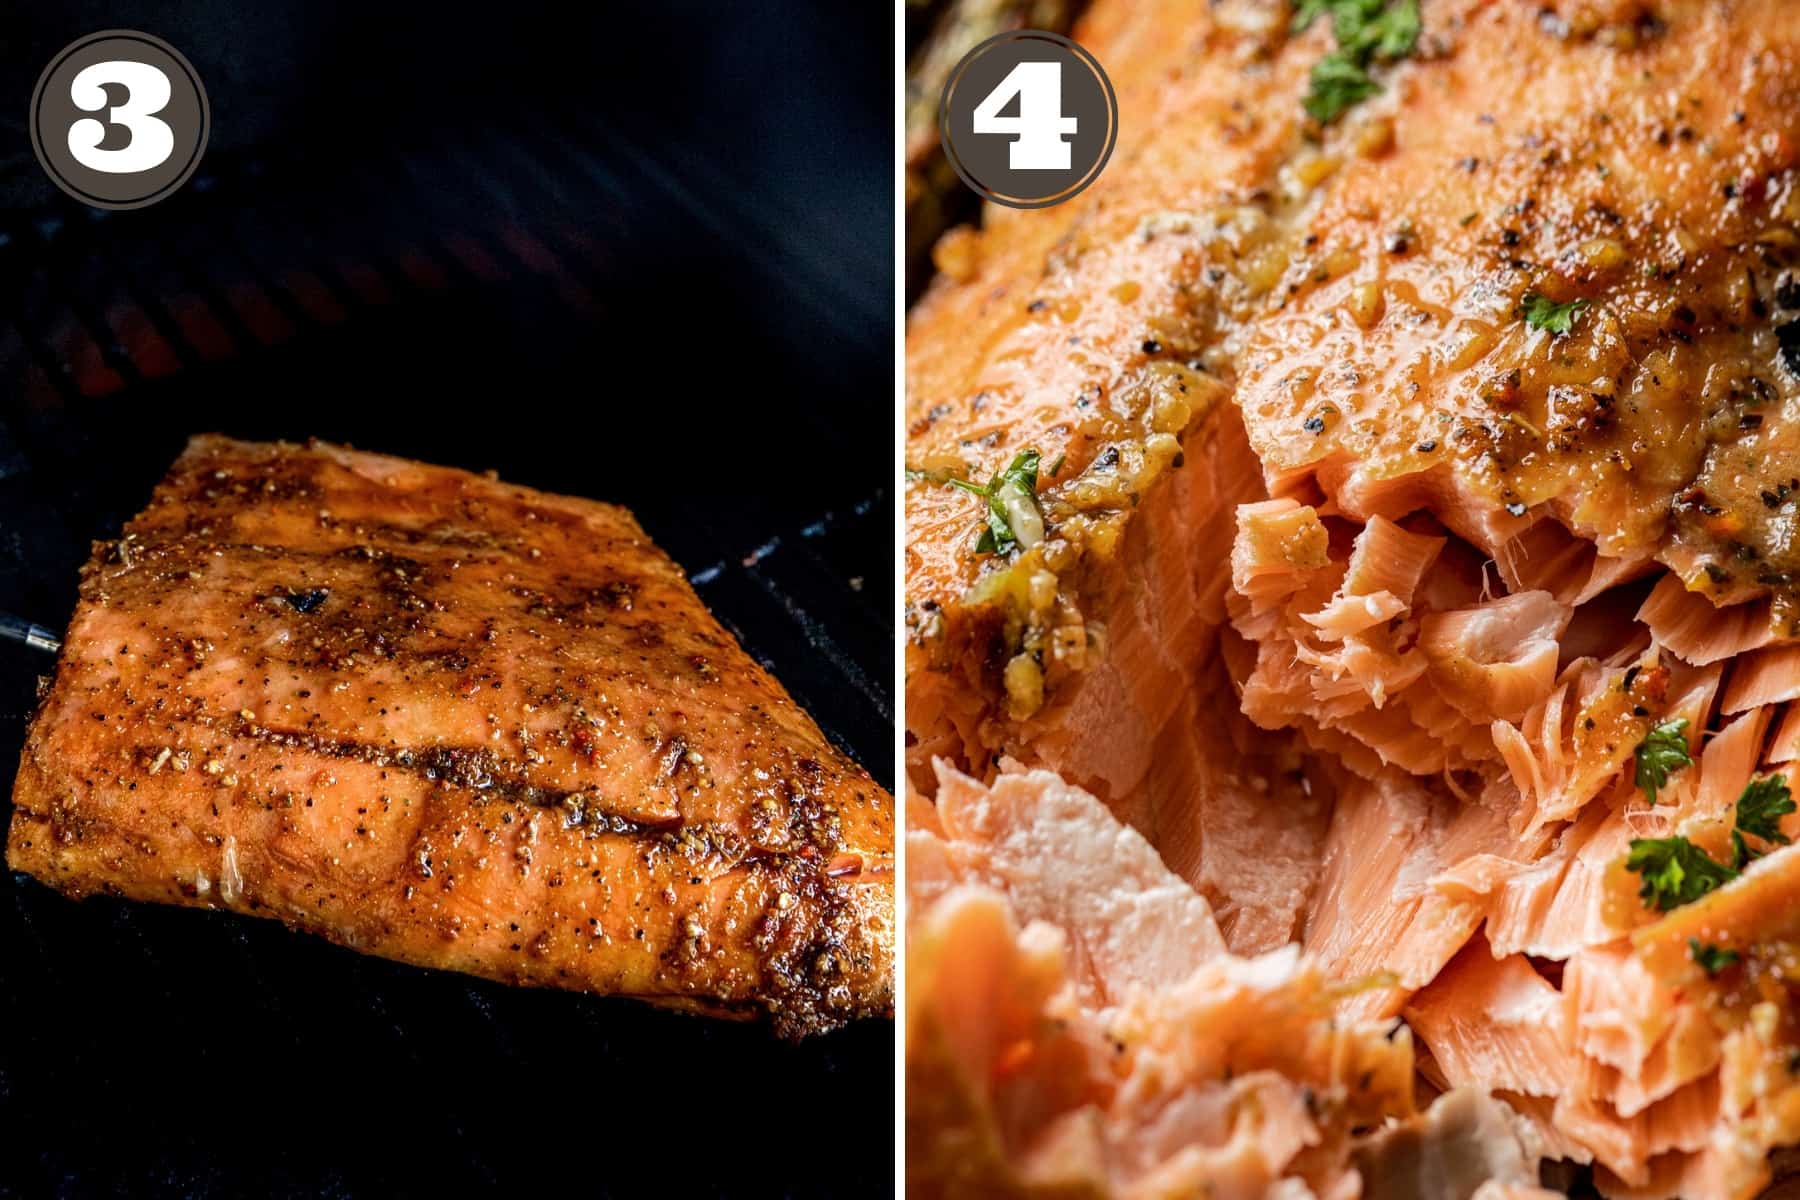 Side by side photos showing a salmon fillet on a grill and a cooked and flakey salmon fillet.